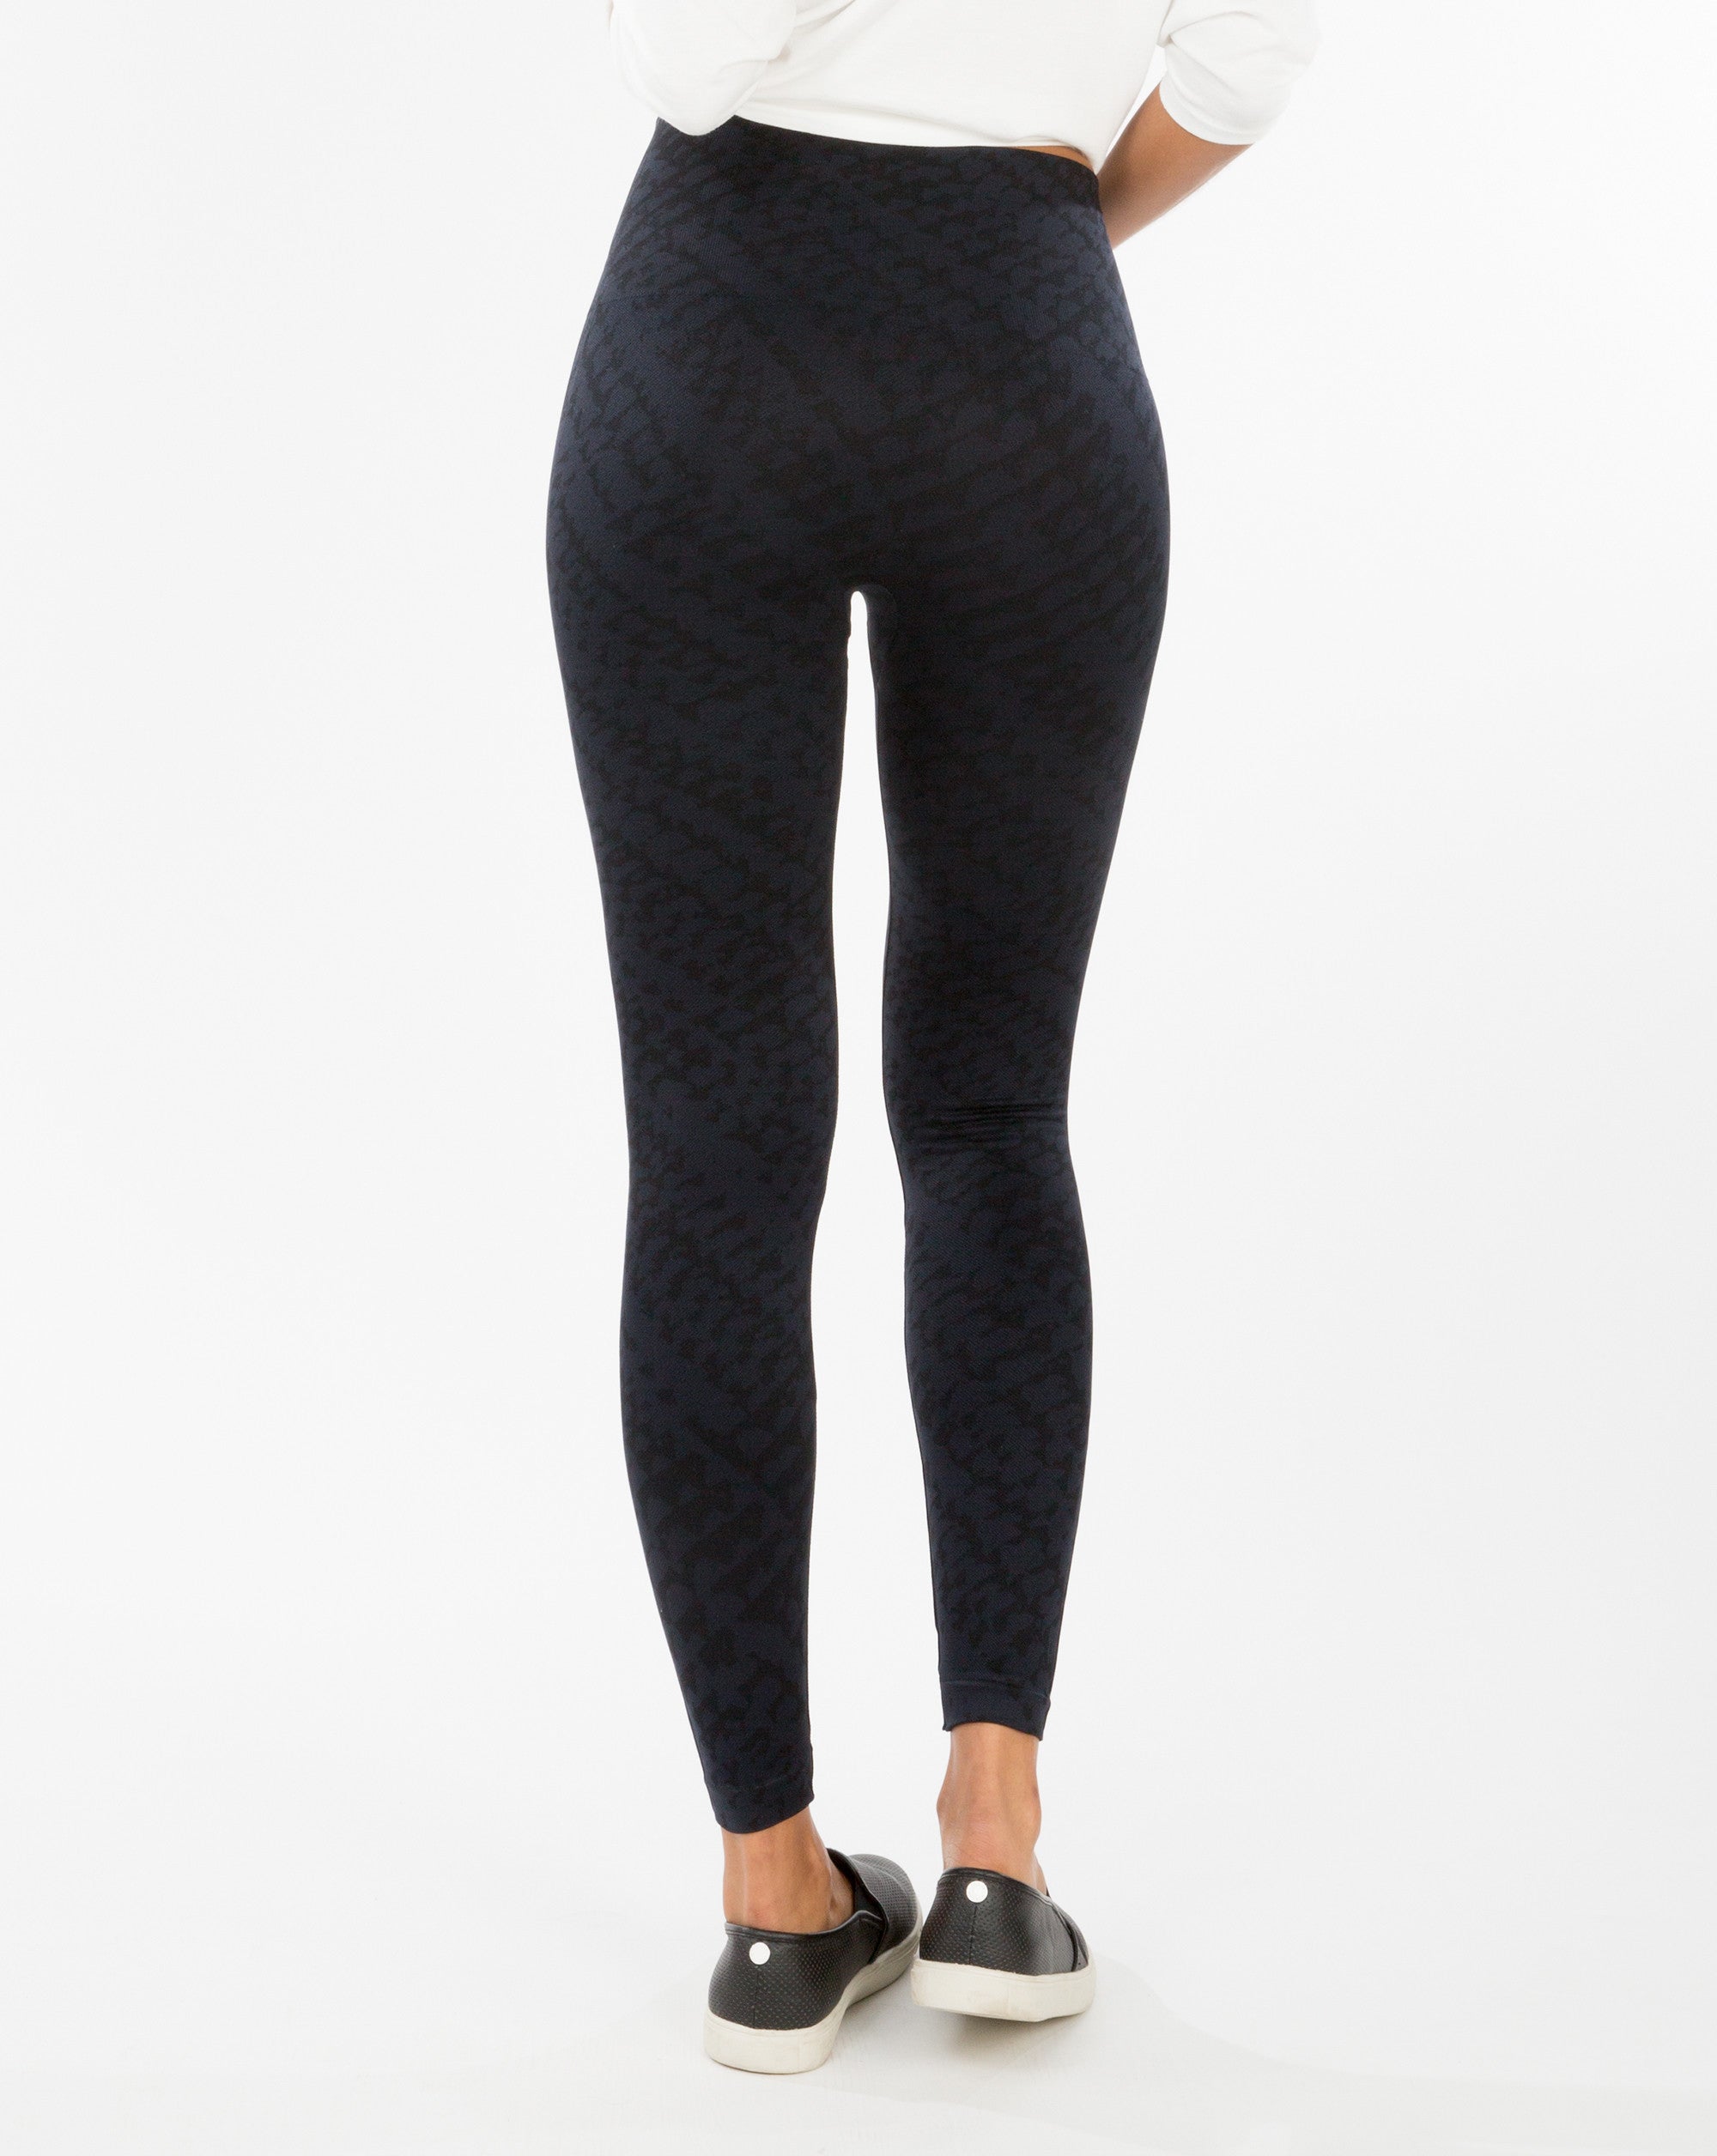 SPANX, Pants & Jumpsuits, Spanx Look At Me Now Highwaisted Seamless  Leggings Size Small Black Knit Twill